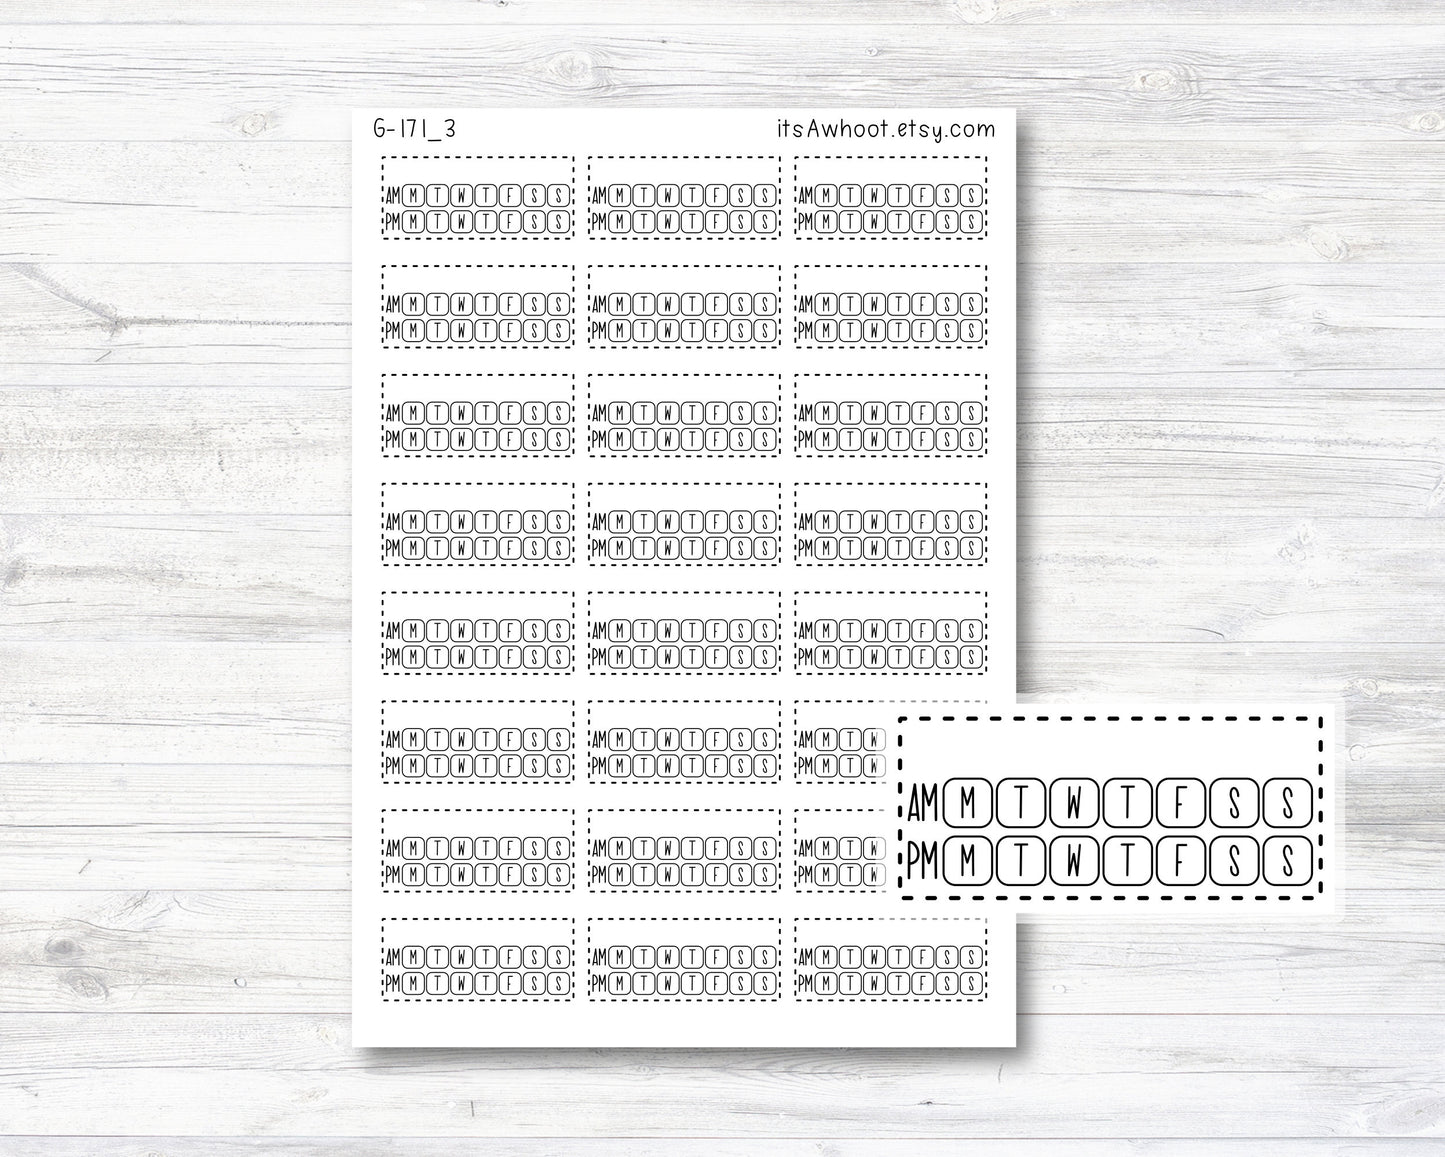 Blank Am/PM Daily Habit Tracker Planner Stickers, Fill in Your Own Habit Daily/Weekly Tracker Stickers (G171_3)